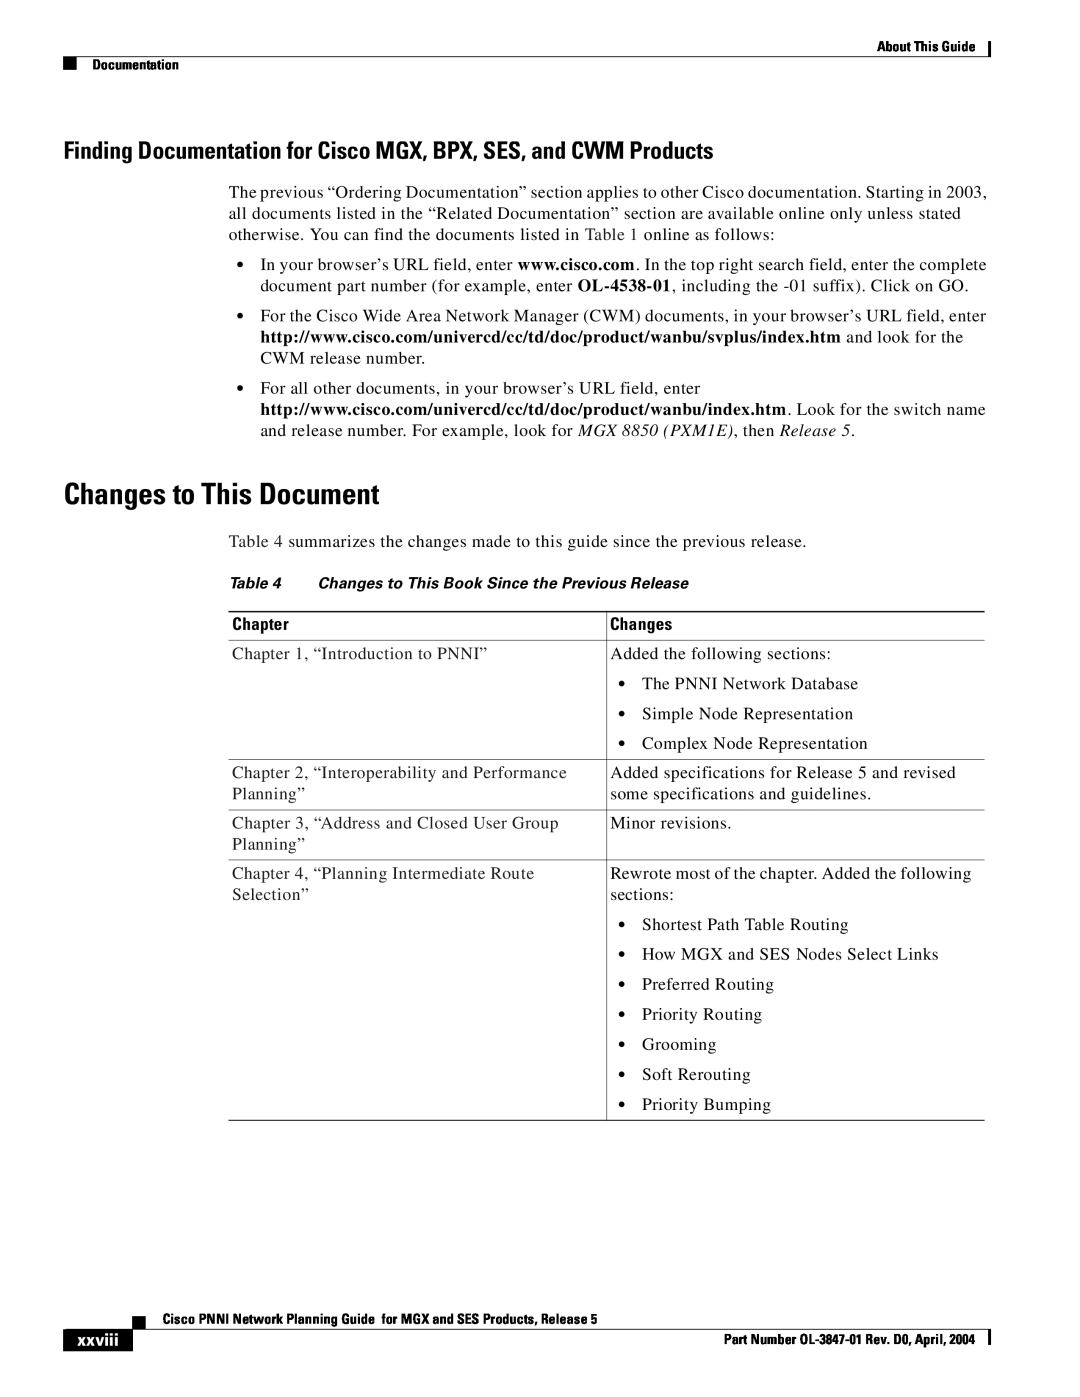 Cisco Systems Network Router Changes to This Document, Finding Documentation for Cisco MGX, BPX, SES, and CWM Products 